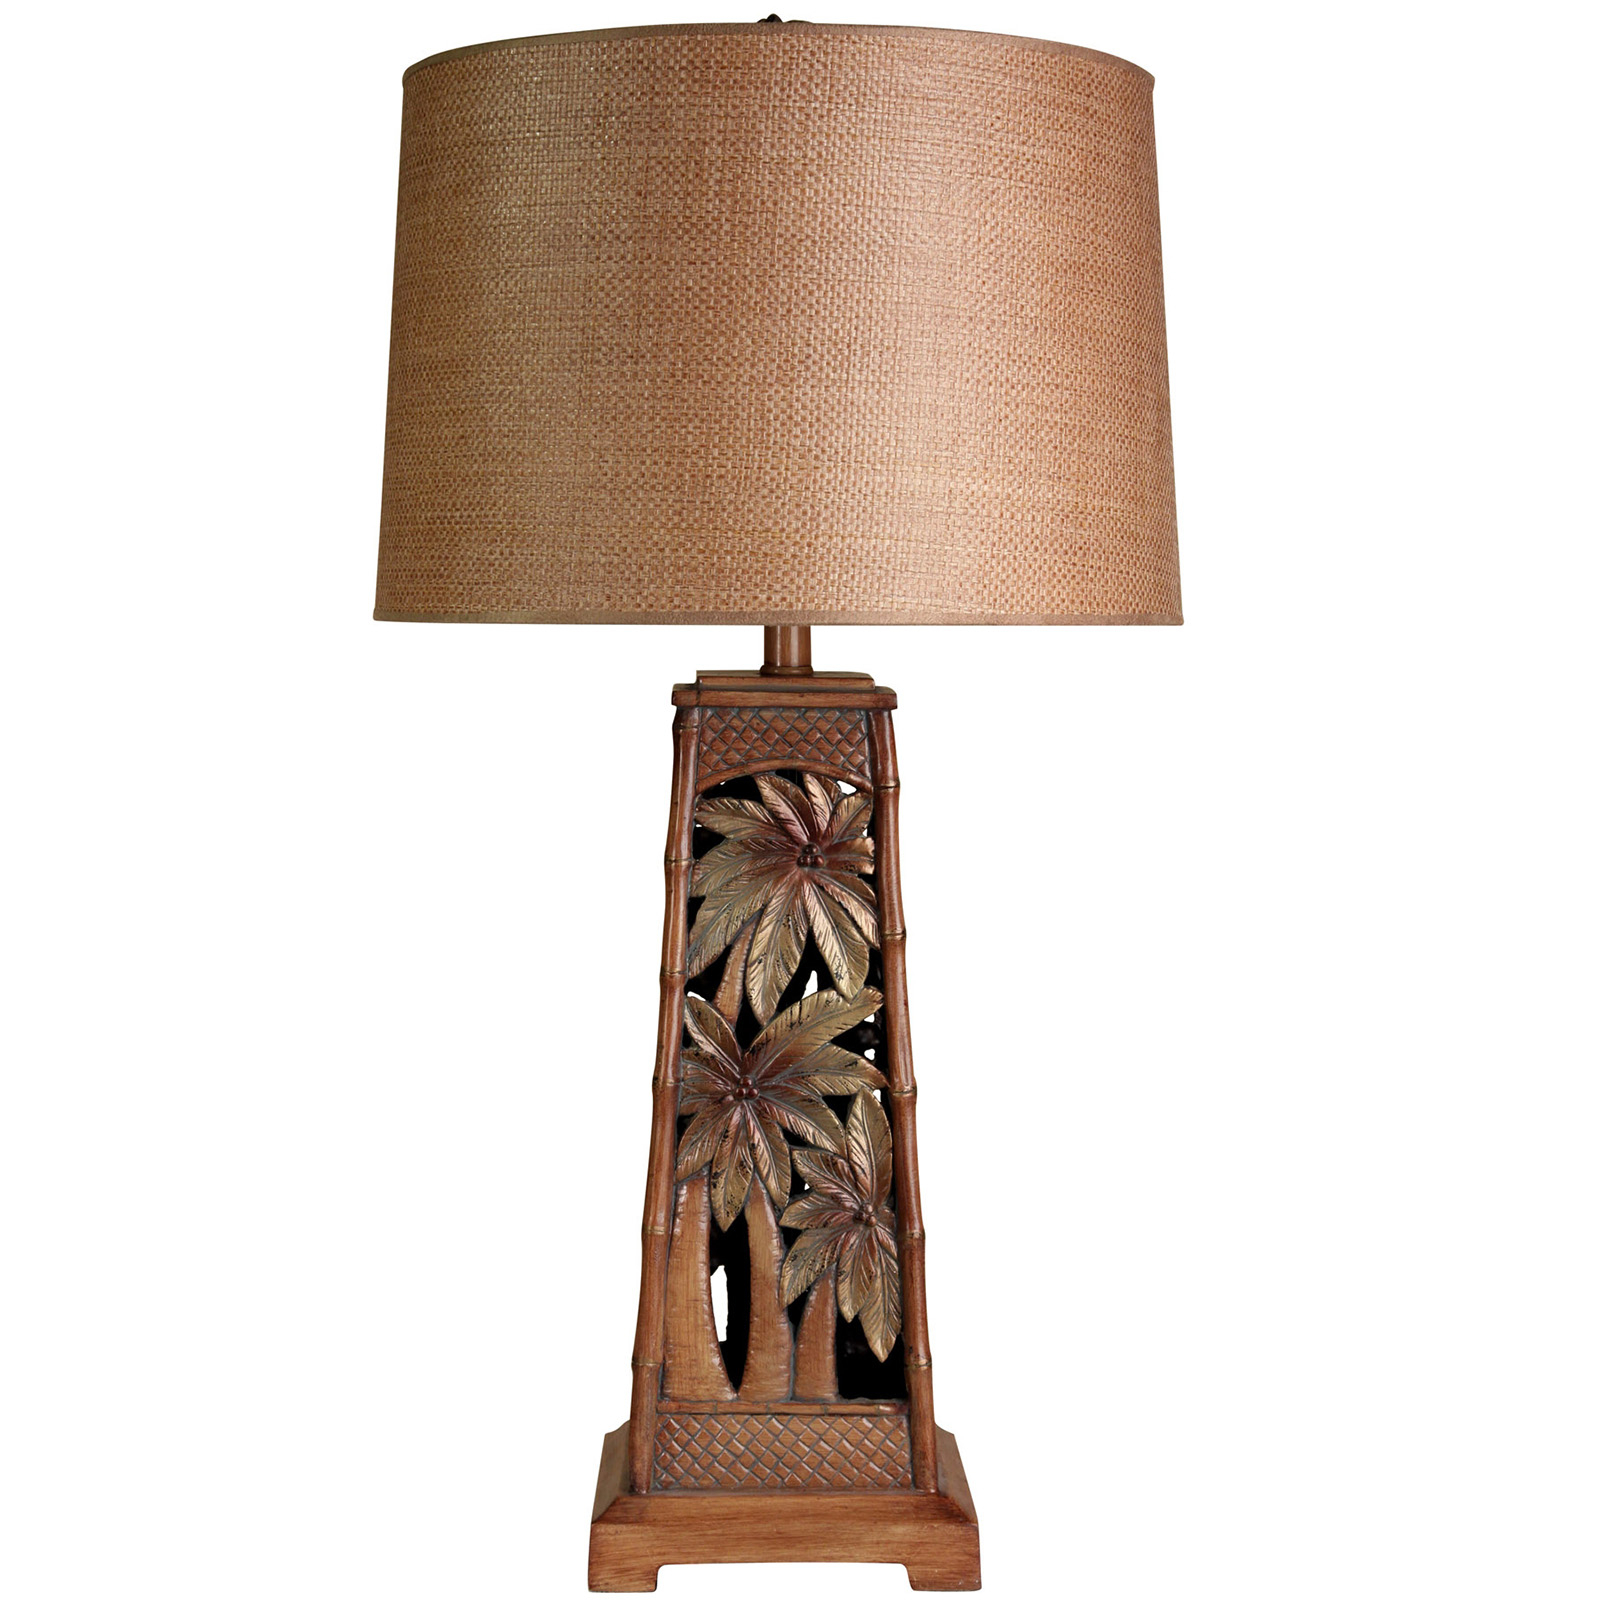 "Palm Tree" Tropical Inspired Table Lamp